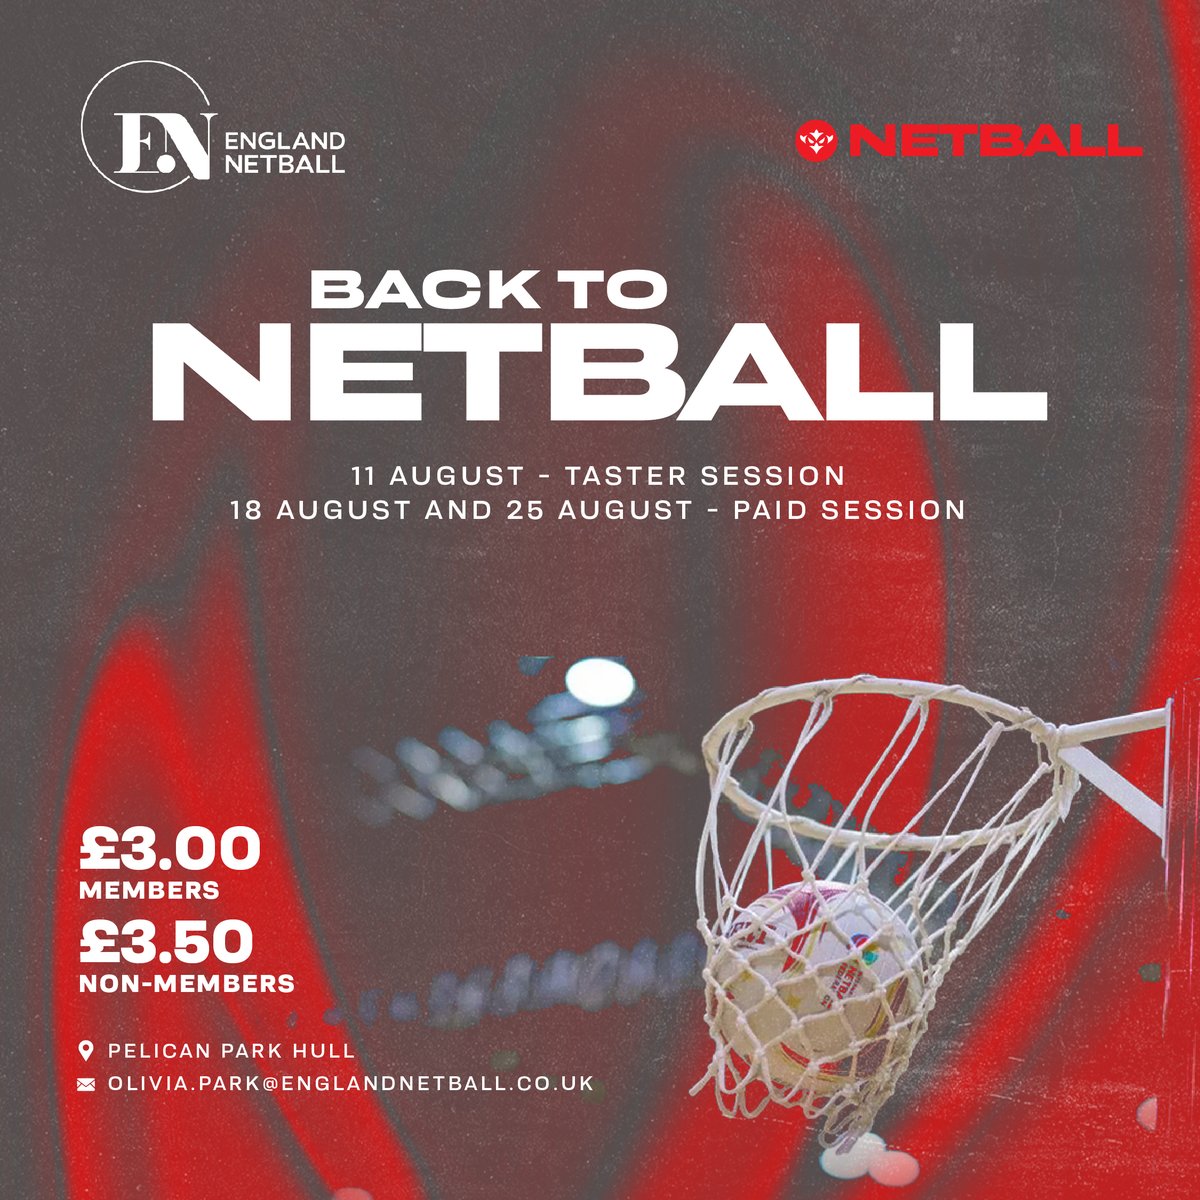 Back to Netball is fast approaching 👀 Sign up here for our free taster session on 11th August, 6:30-7:30pm 👉 bit.ly/3JBfNRt #RobinsTogether❤️🤍